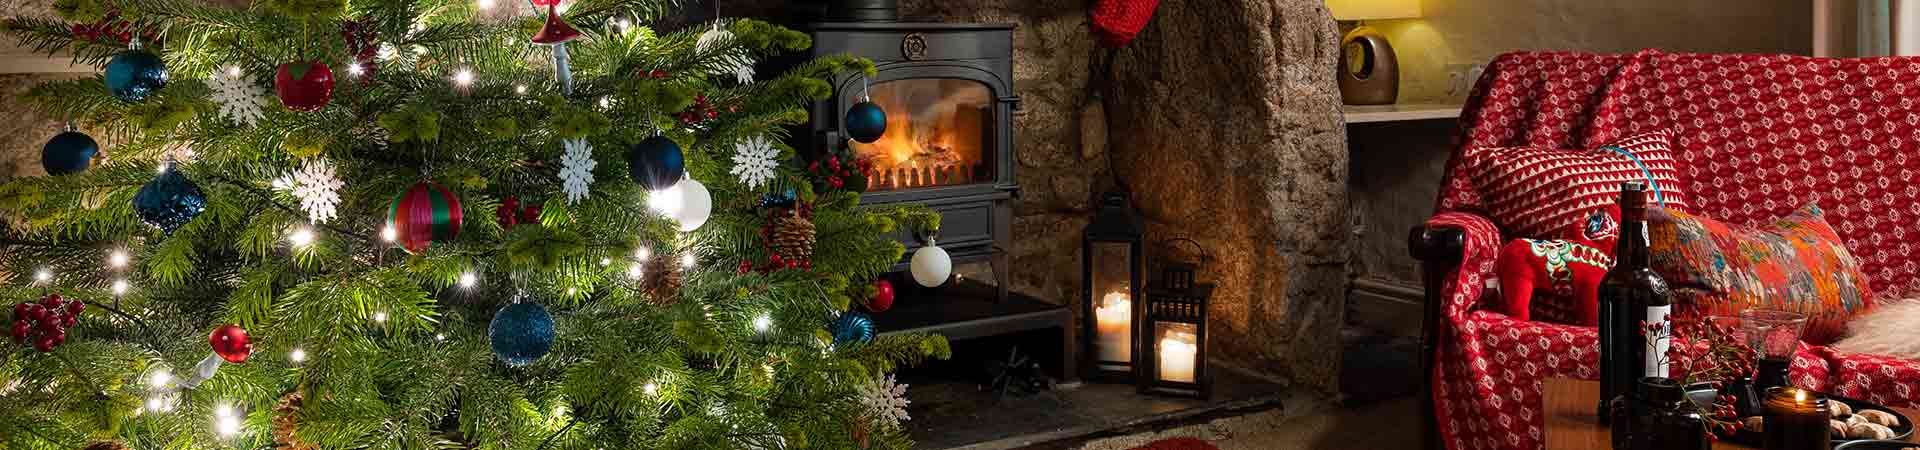 Top five ways to add some extra festive cheer to your Christmas staycation